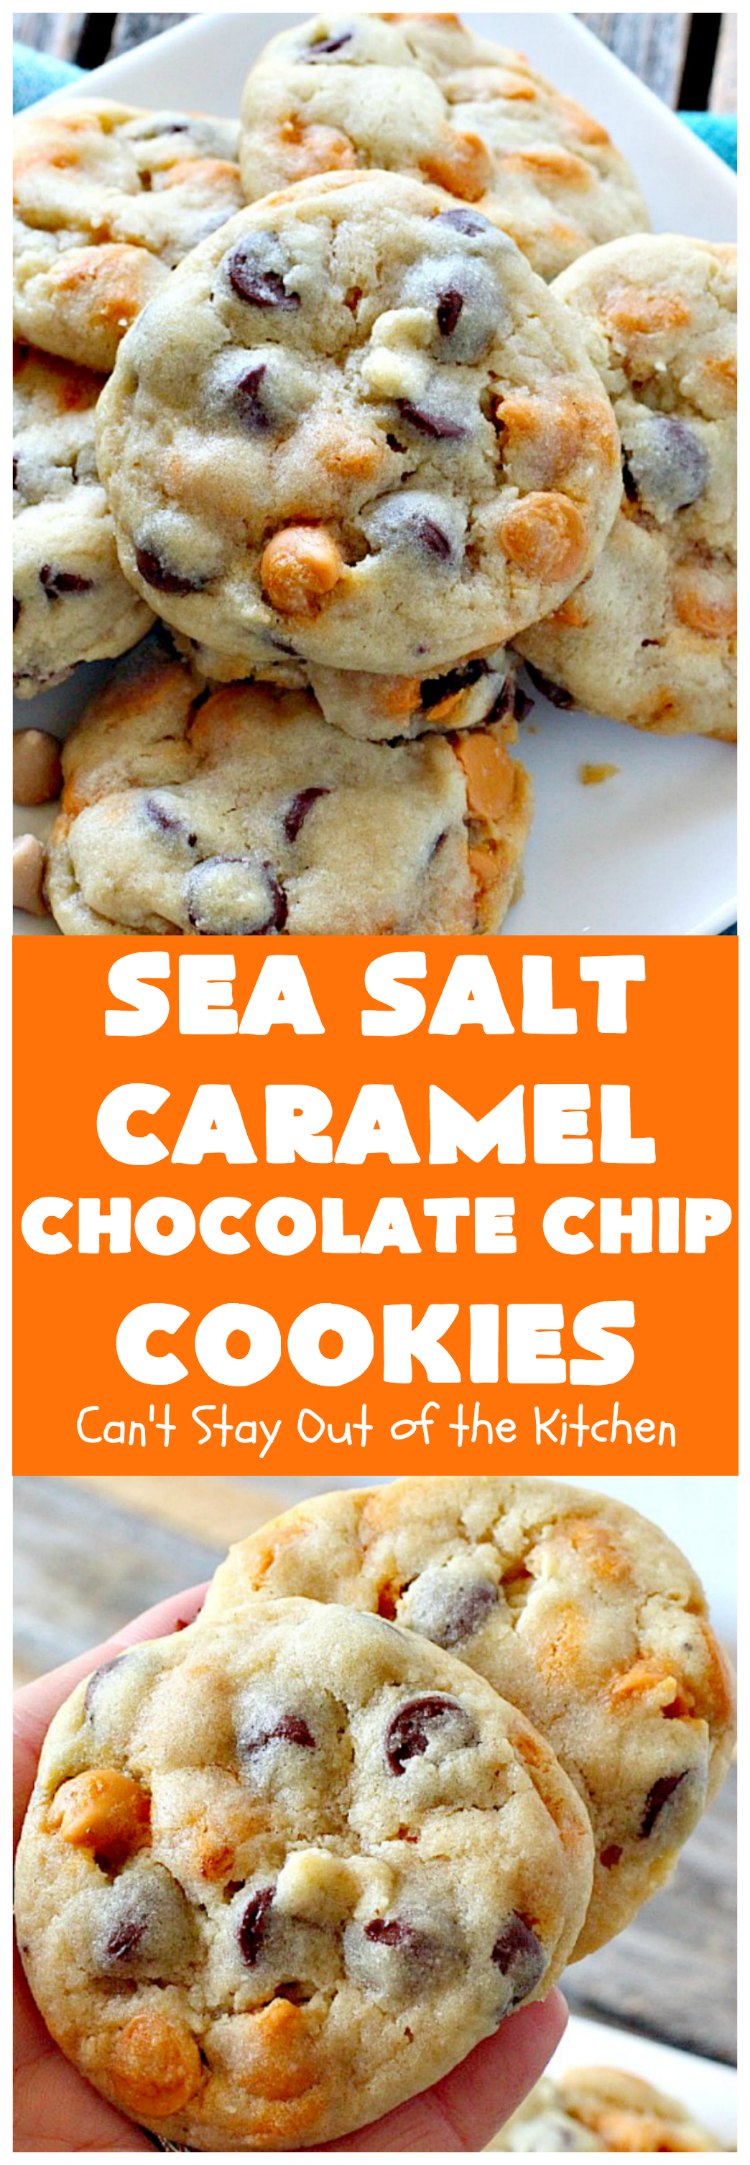 Sea Salt Caramel Chocolate Chip Cookies | Can't Stay Out of the Kitchen | these #cookies are divine! They have double the #caramel & #chocolate chips so they're rich, decadent & heavenly. #dessert